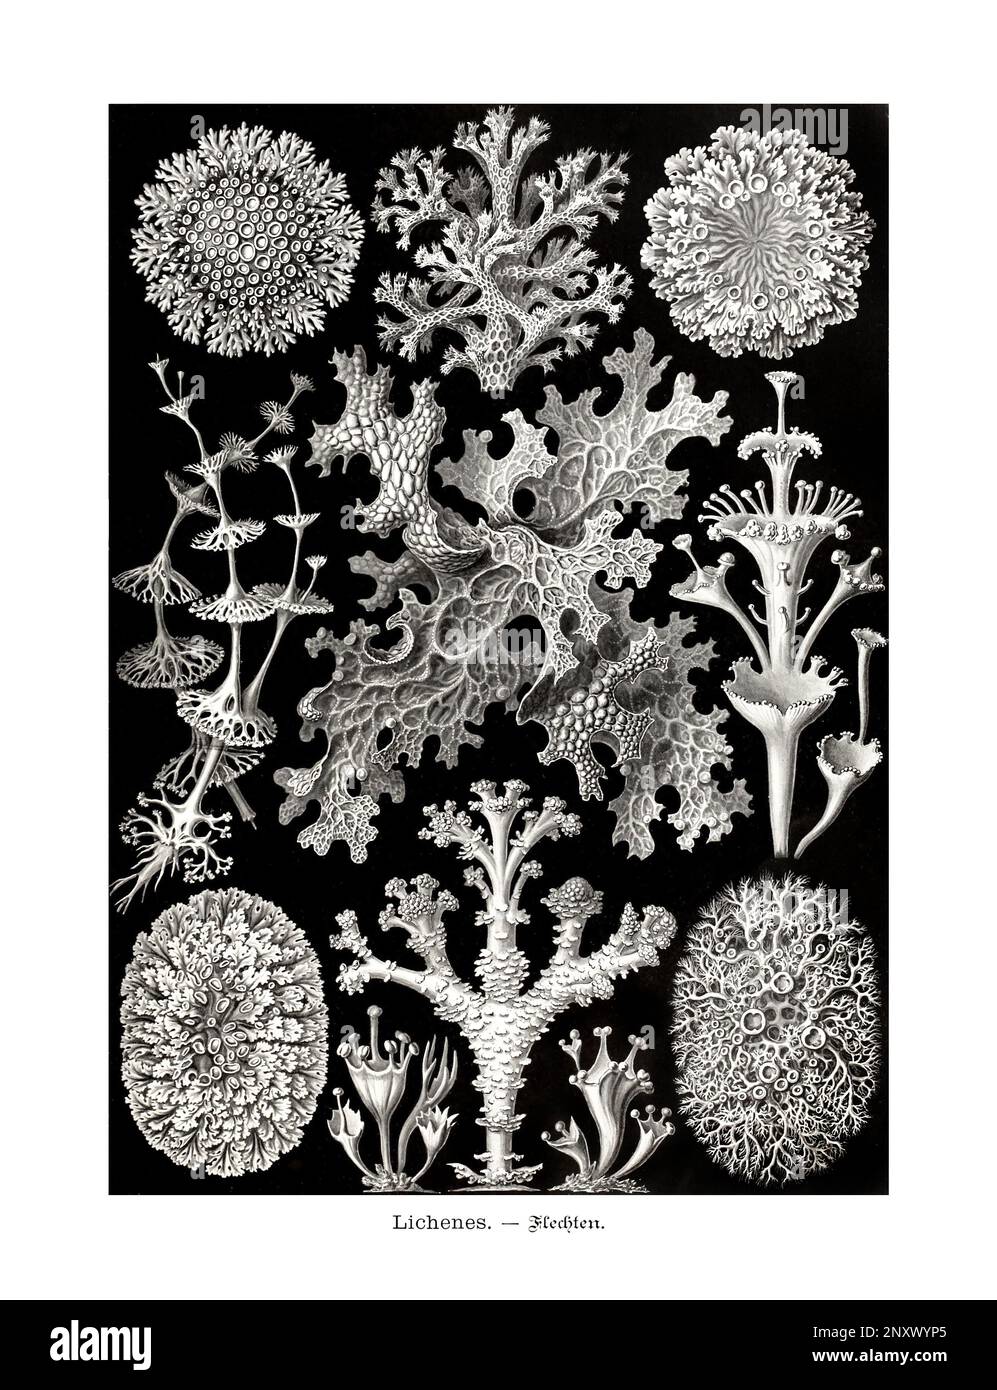 ERNST HAECKEL ART - Lichenes - 19th Century - Antique Zoological illustration - Illustrations of the book : “Art Forms in Nature” Stock Photo